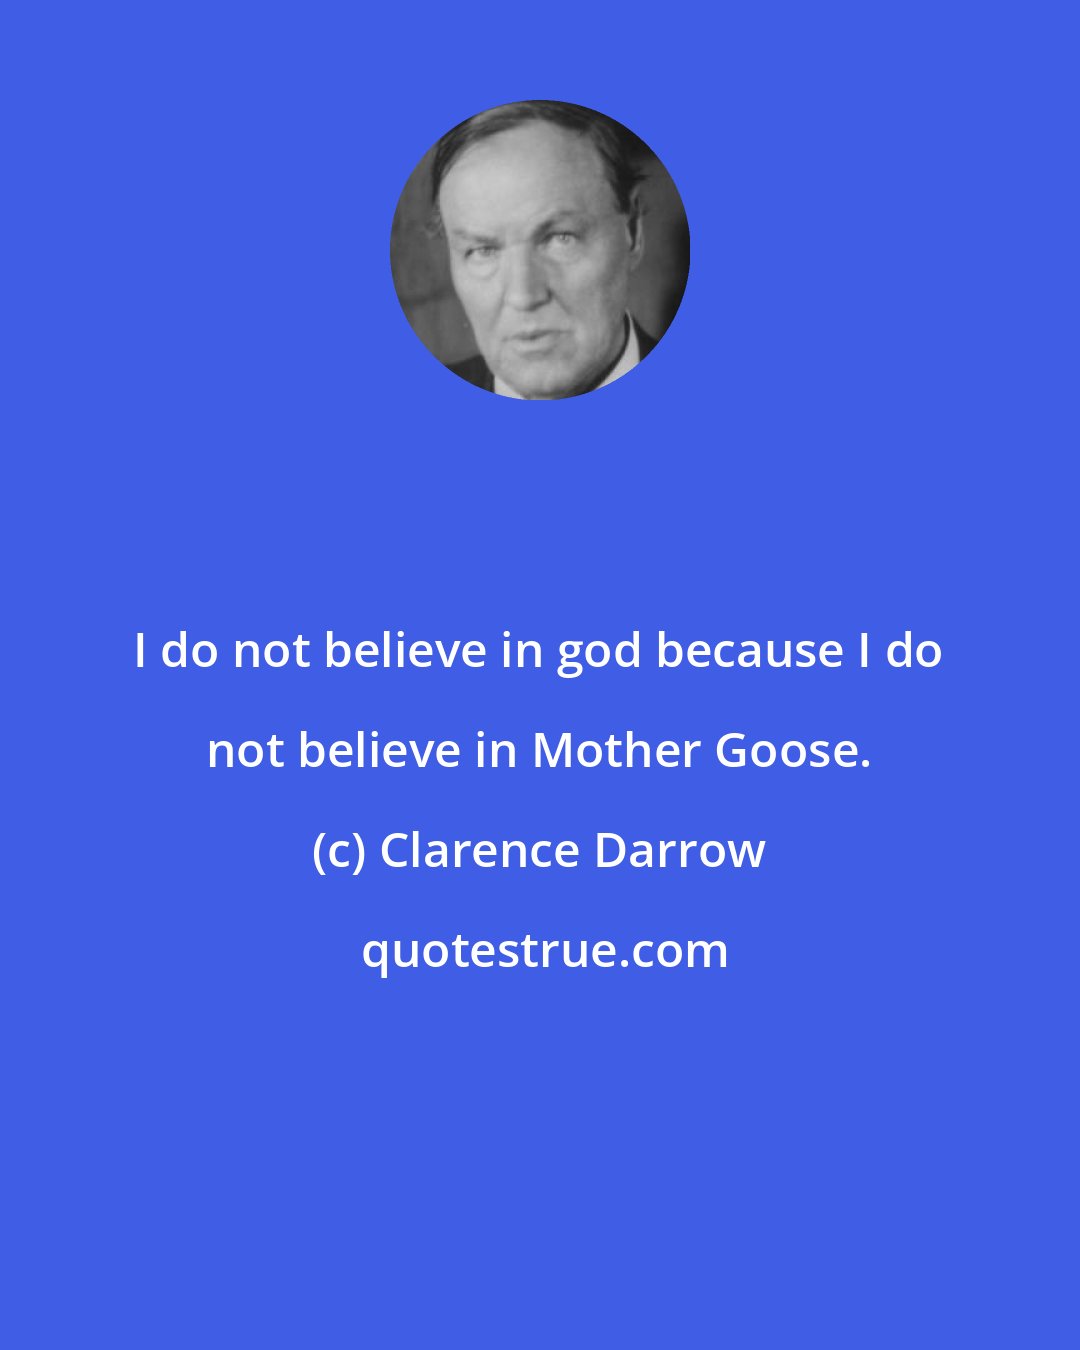 Clarence Darrow: I do not believe in god because I do not believe in Mother Goose.